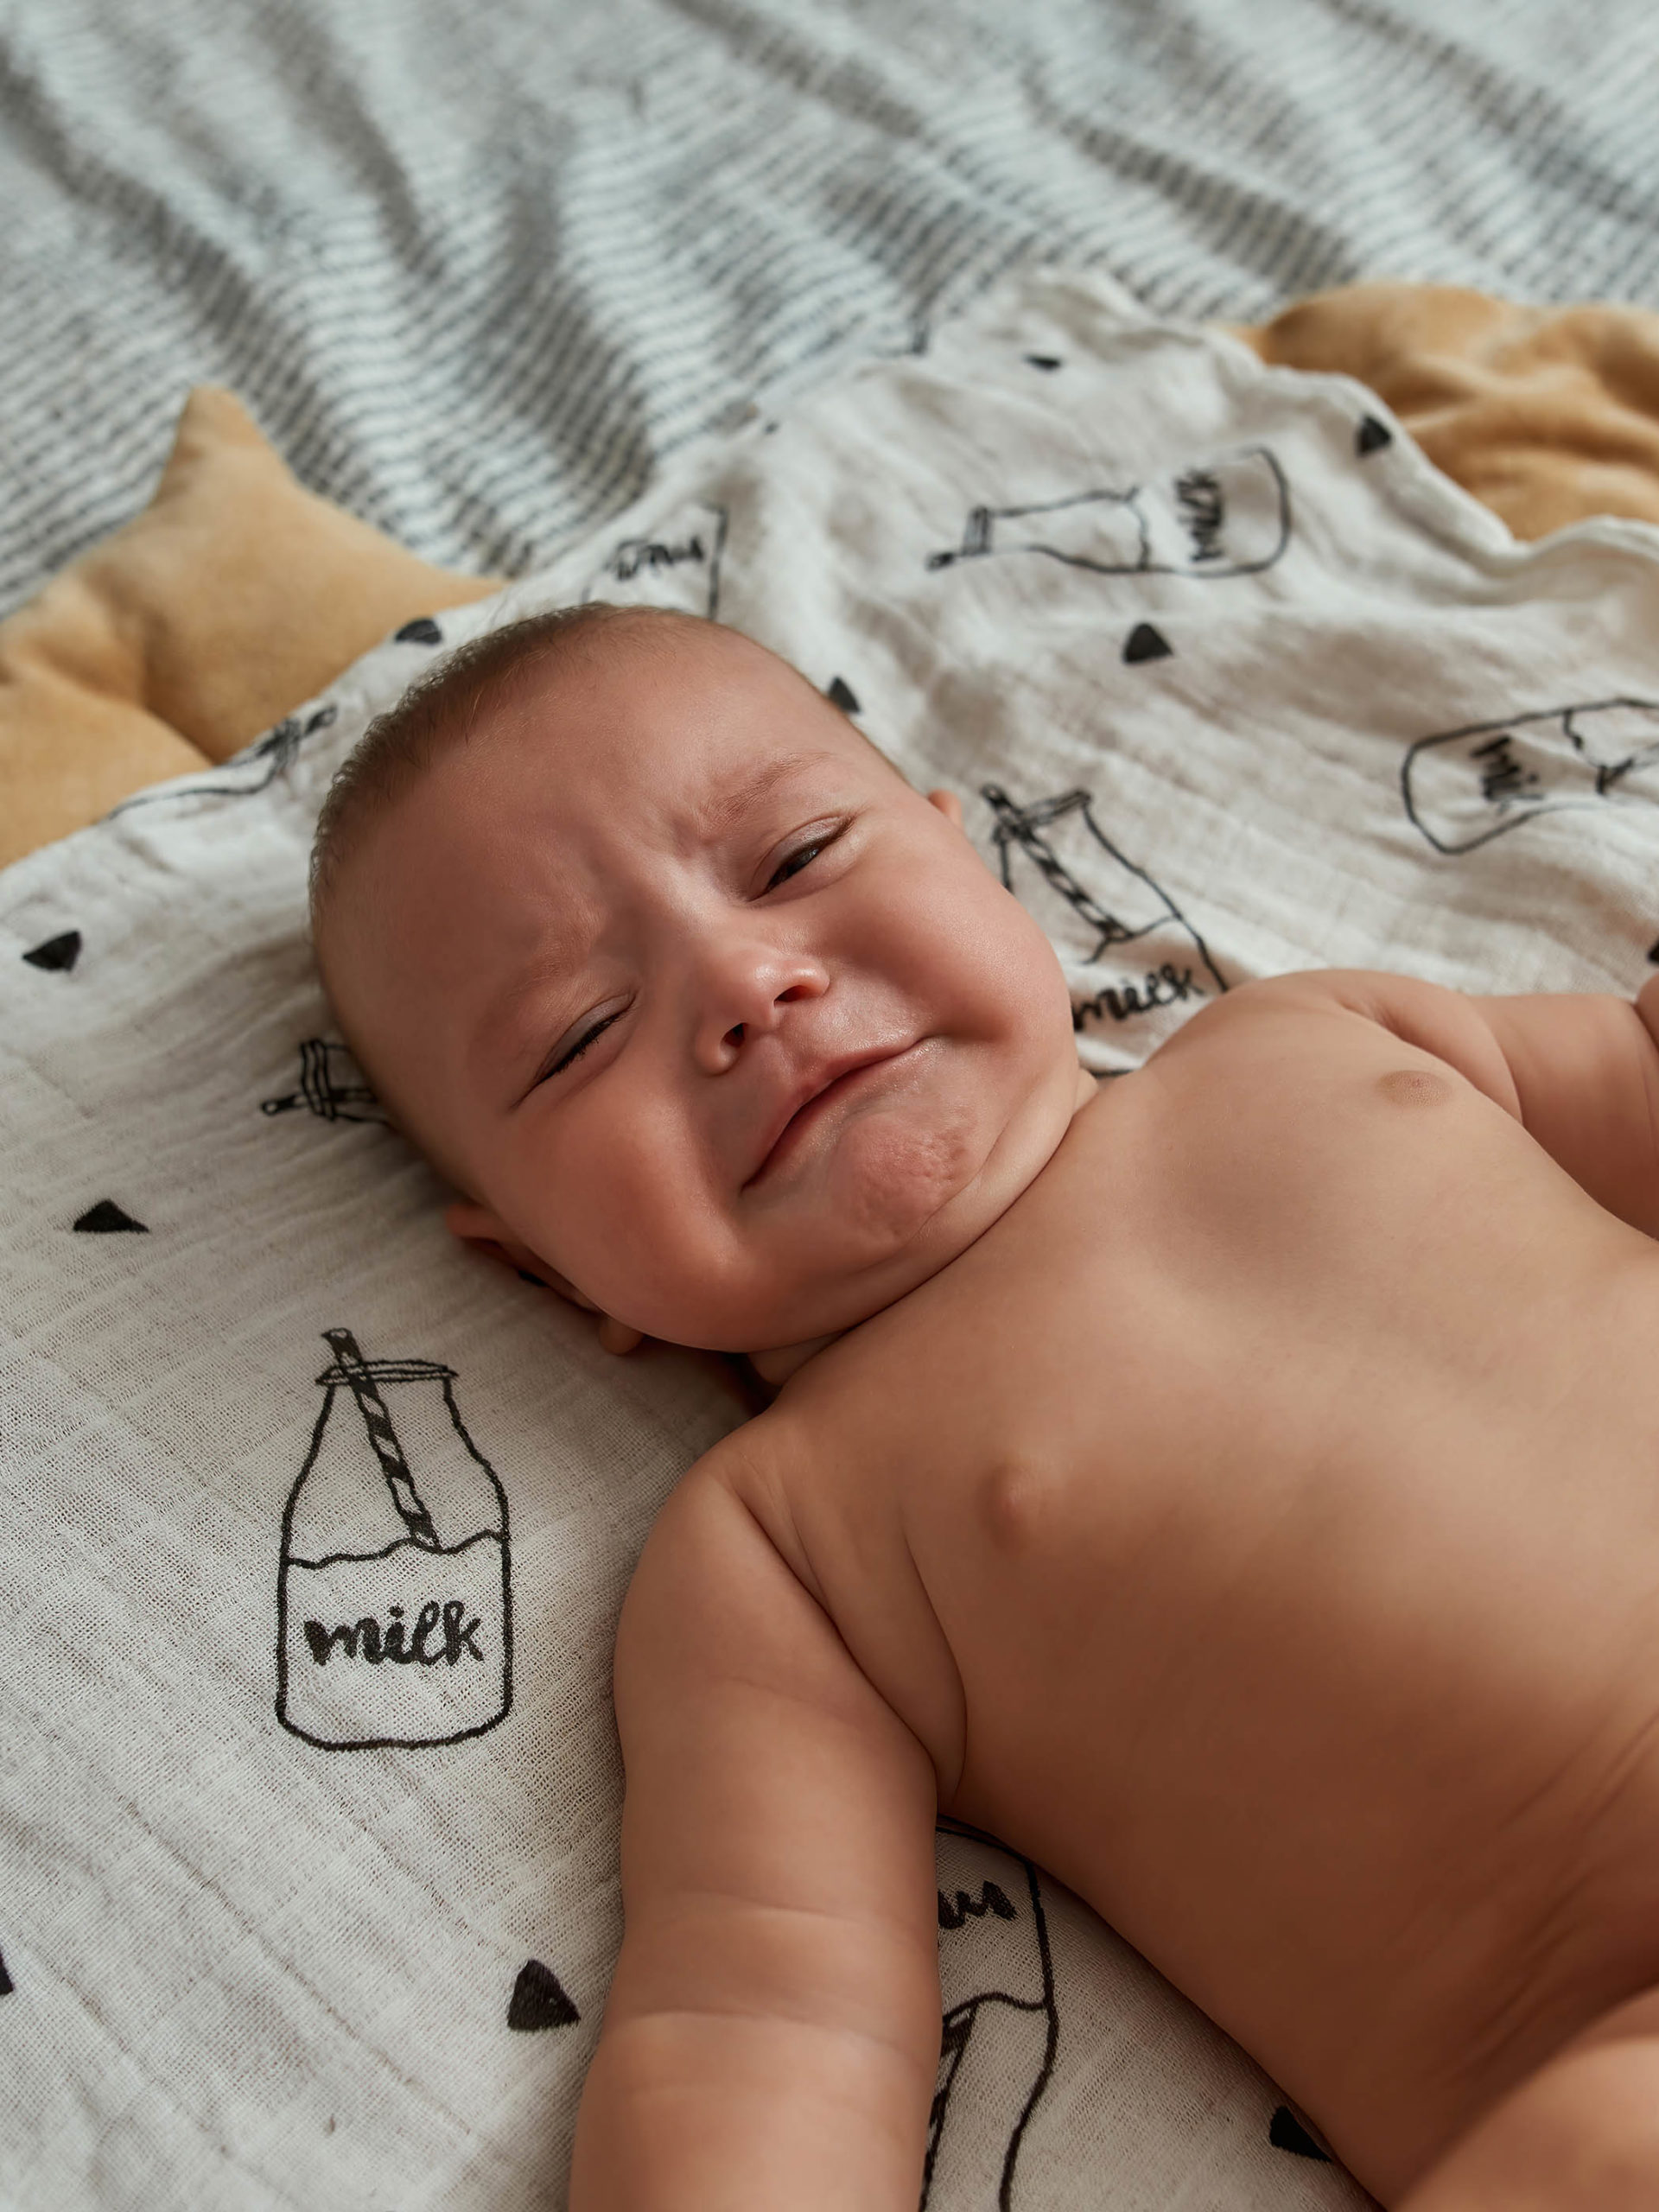 distraught baby waiting for someone to help releive pain and discomfort